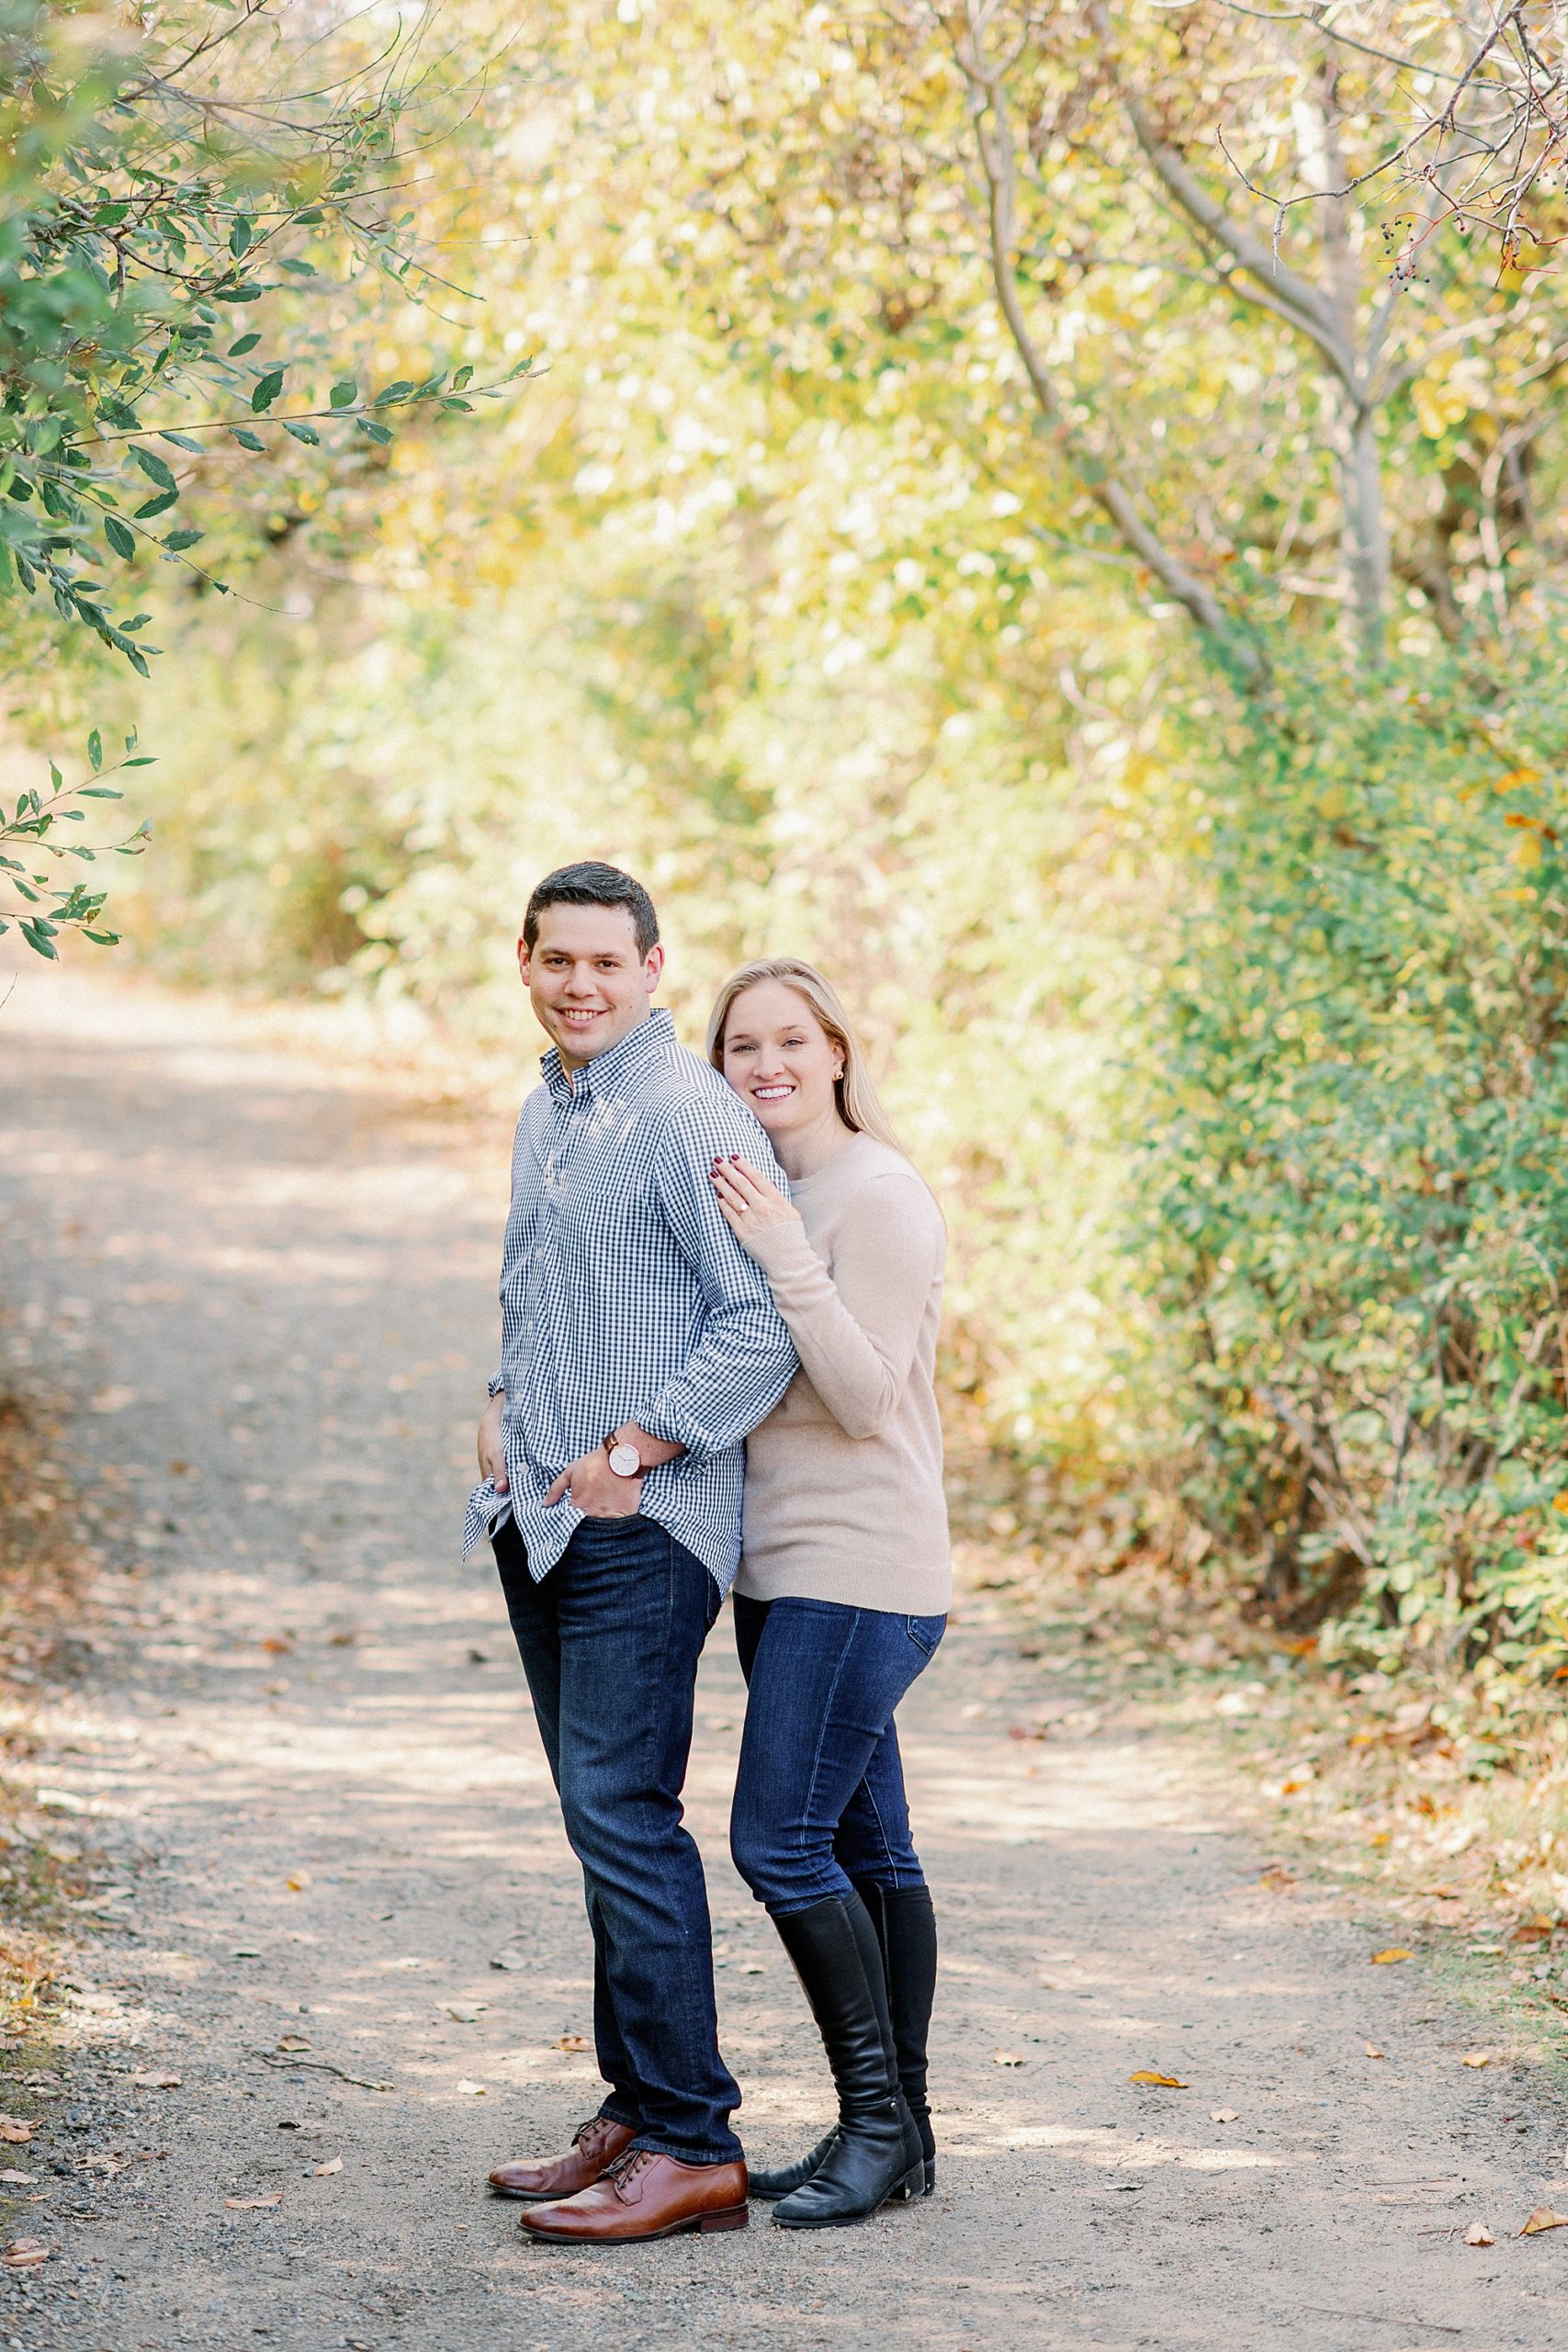 New England Fall Engagement session with foliage popping Halibut Point